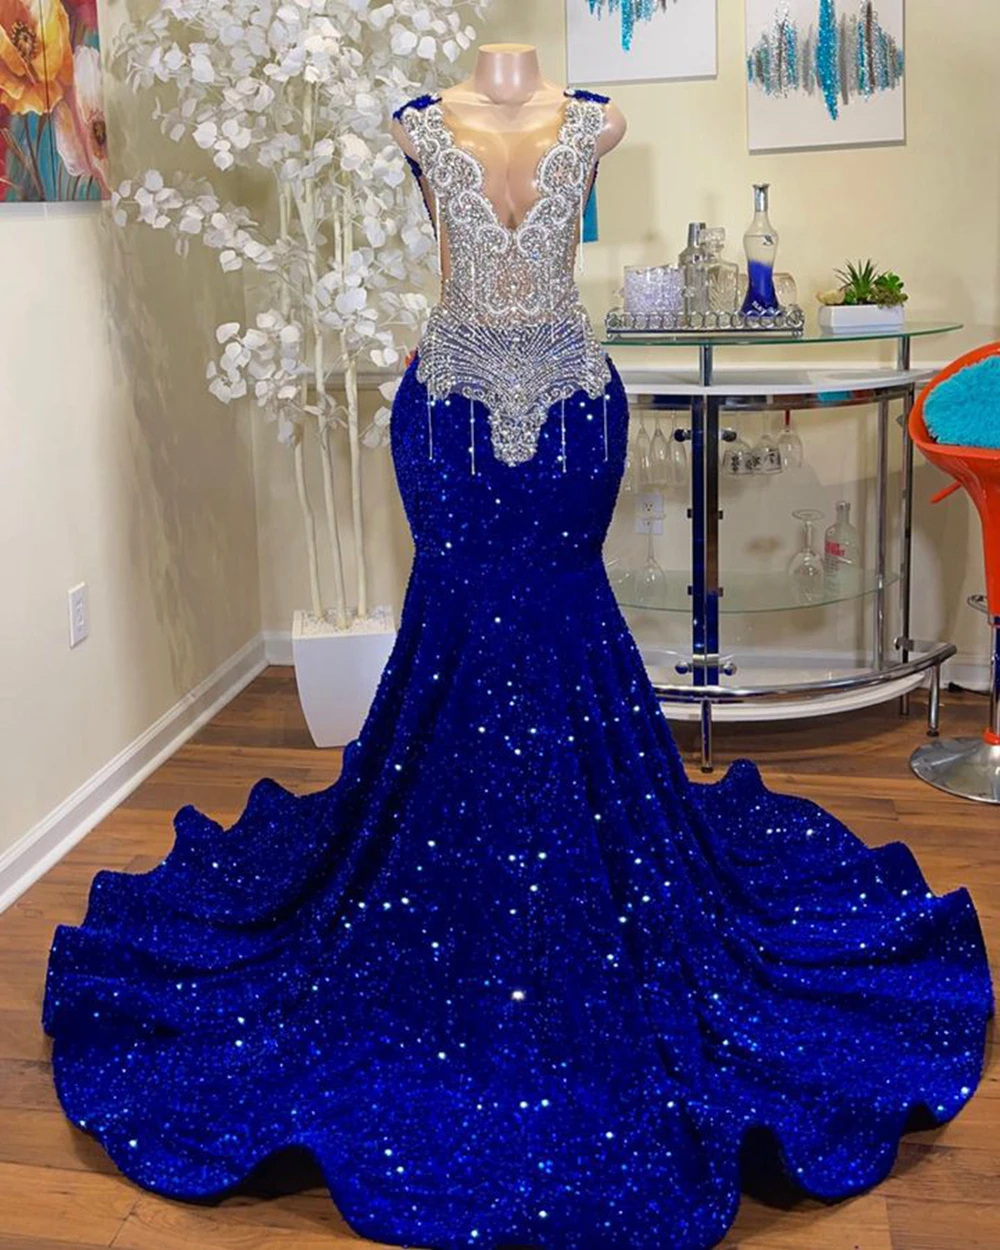 Prom Dress Floral, Mermaid Style Royal Blue Long Prom Dresses,Luxury Sparkly Crystals Diamond Black Girls